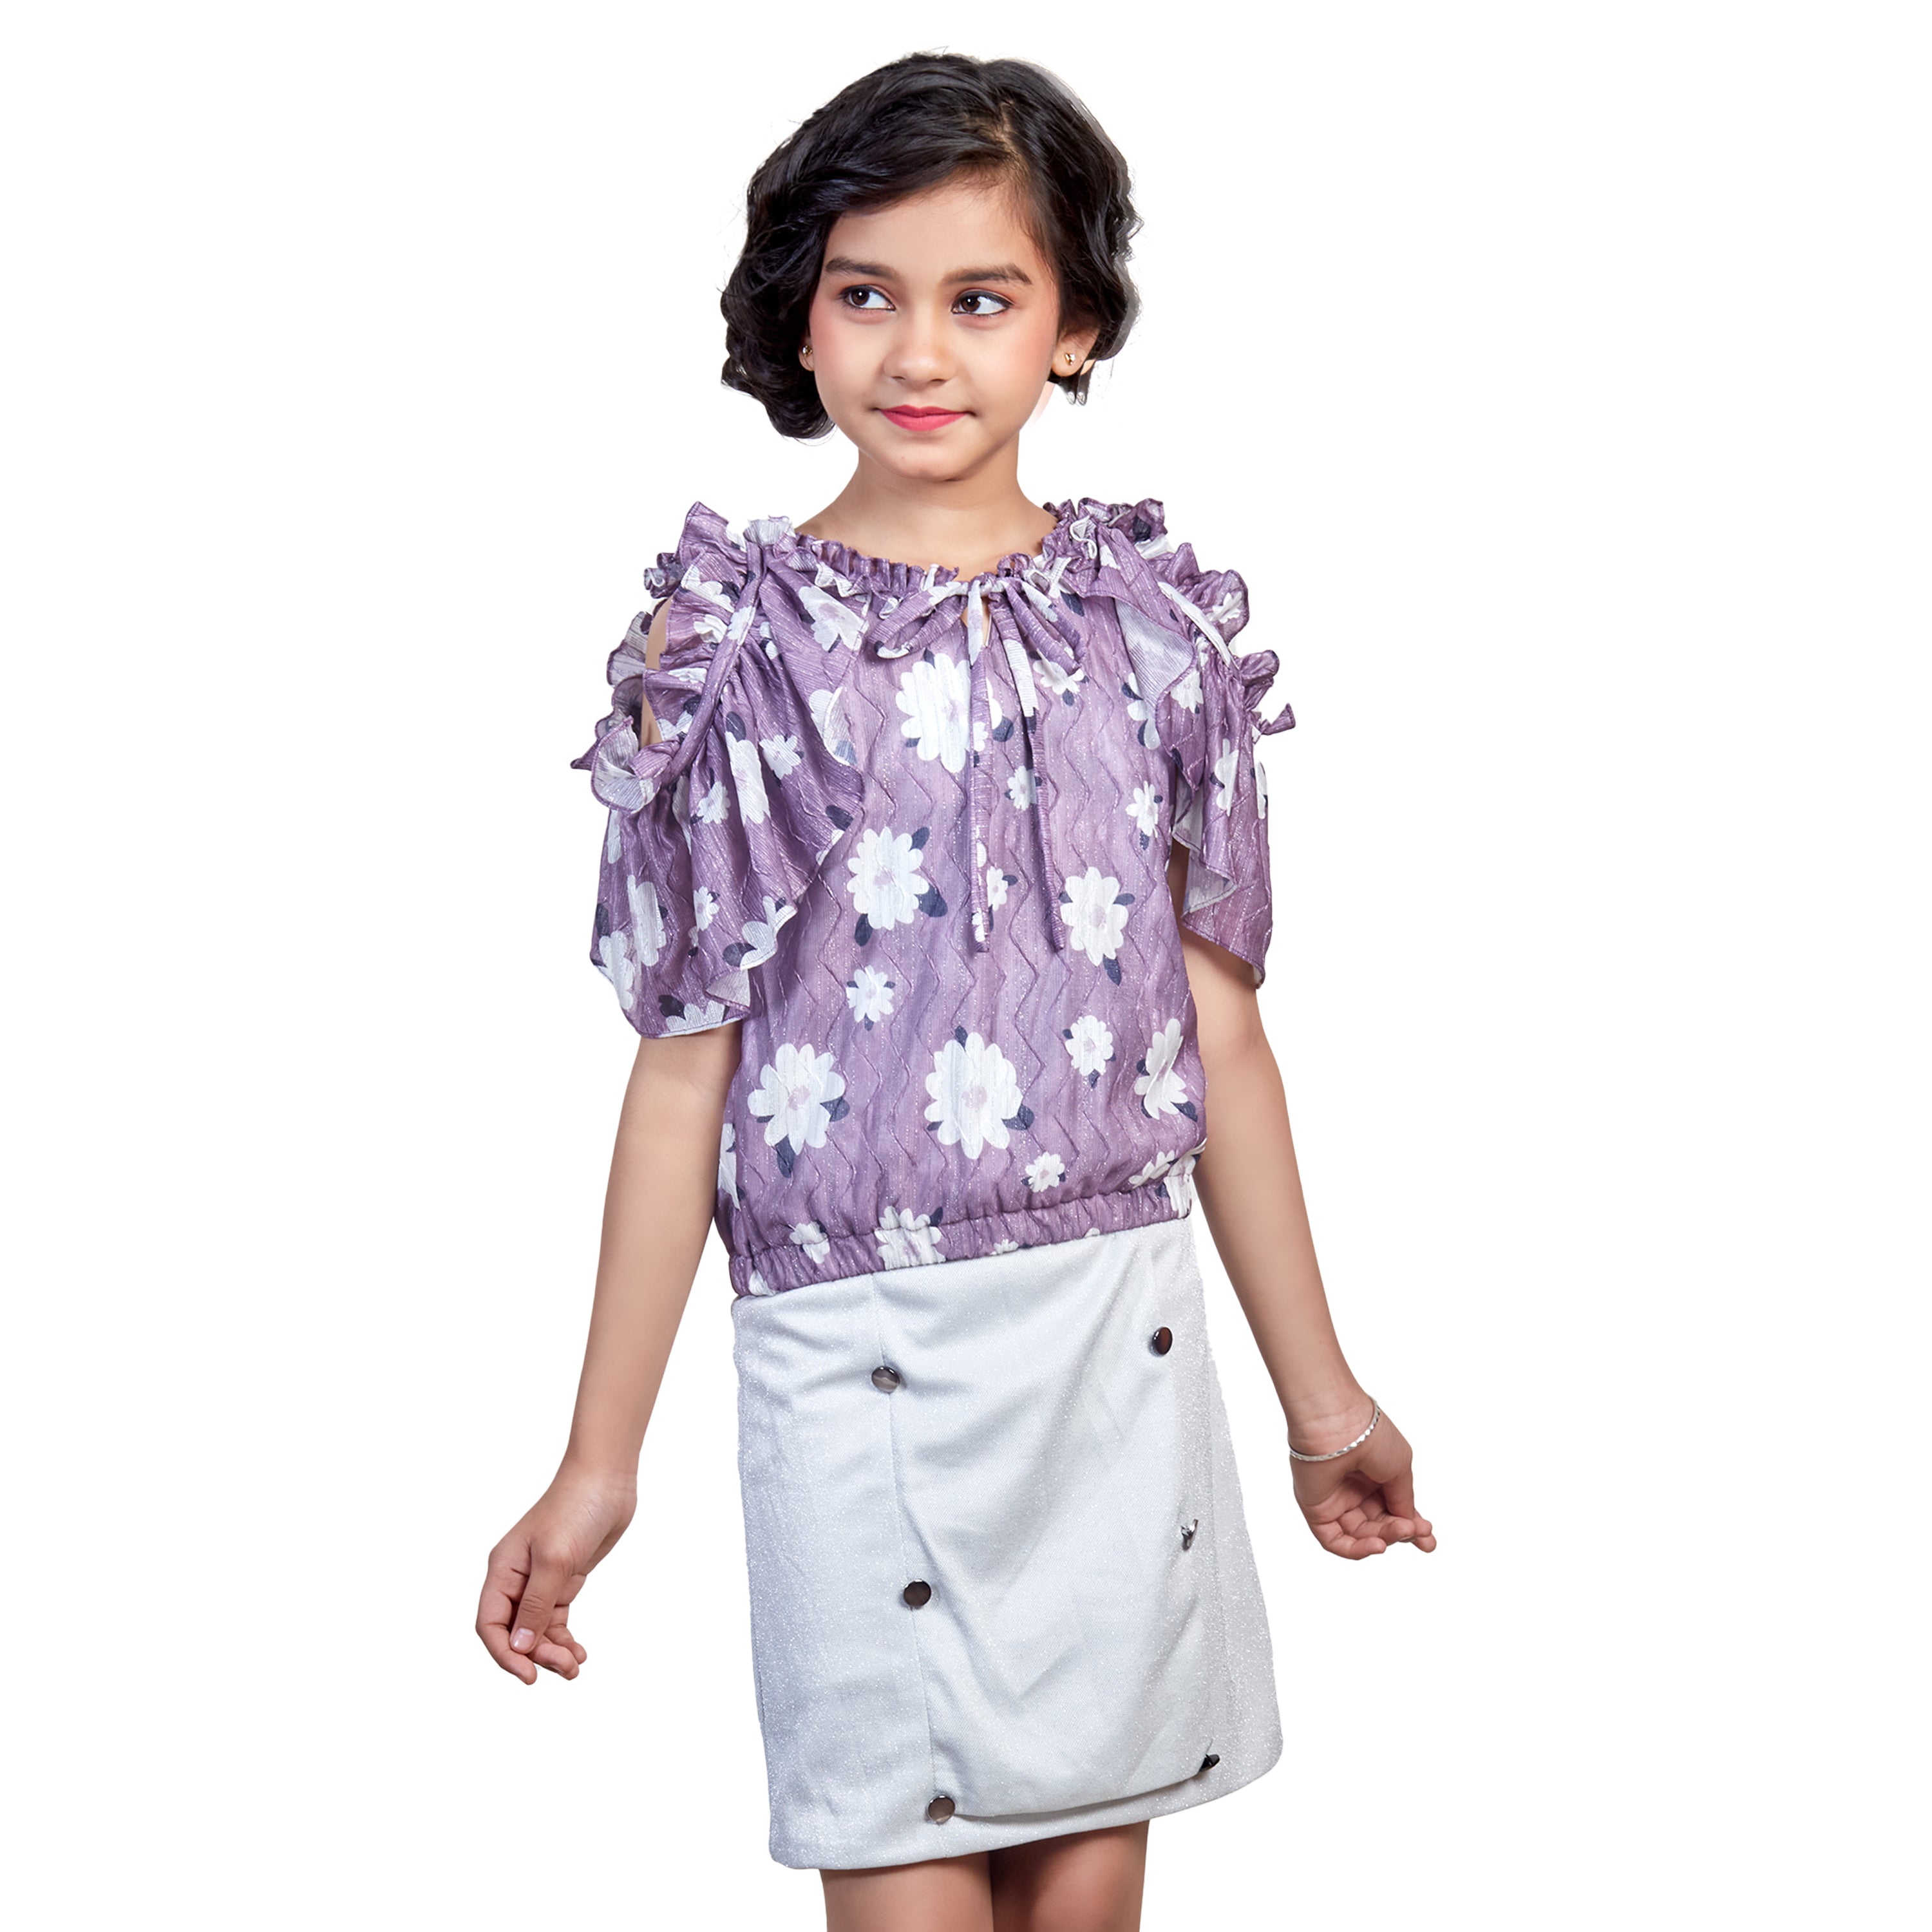 Floral Top With Skirt - Purple